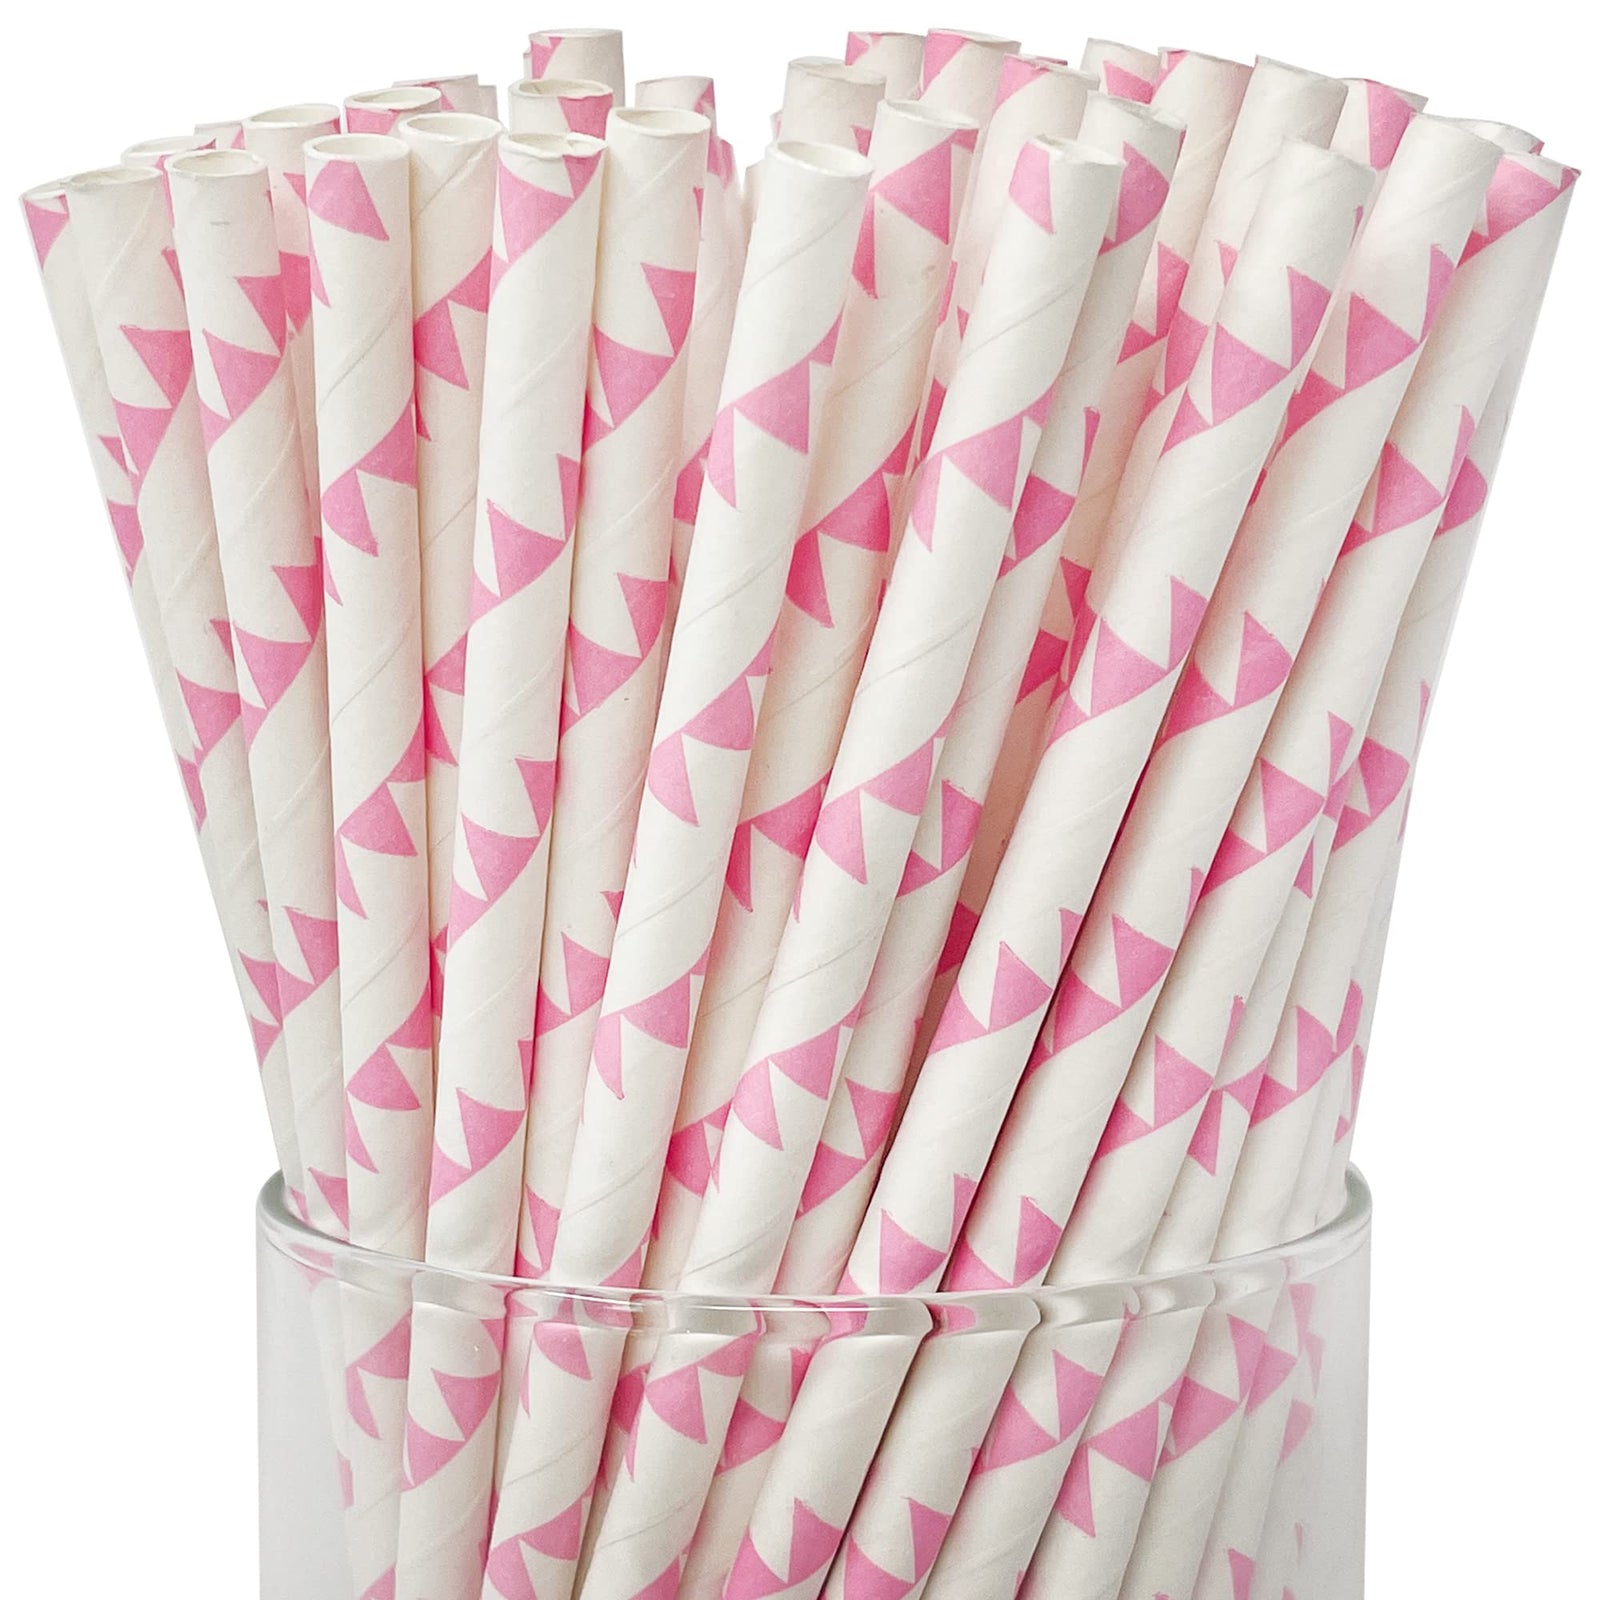 Pennant Banner Straws - 6 Color Options